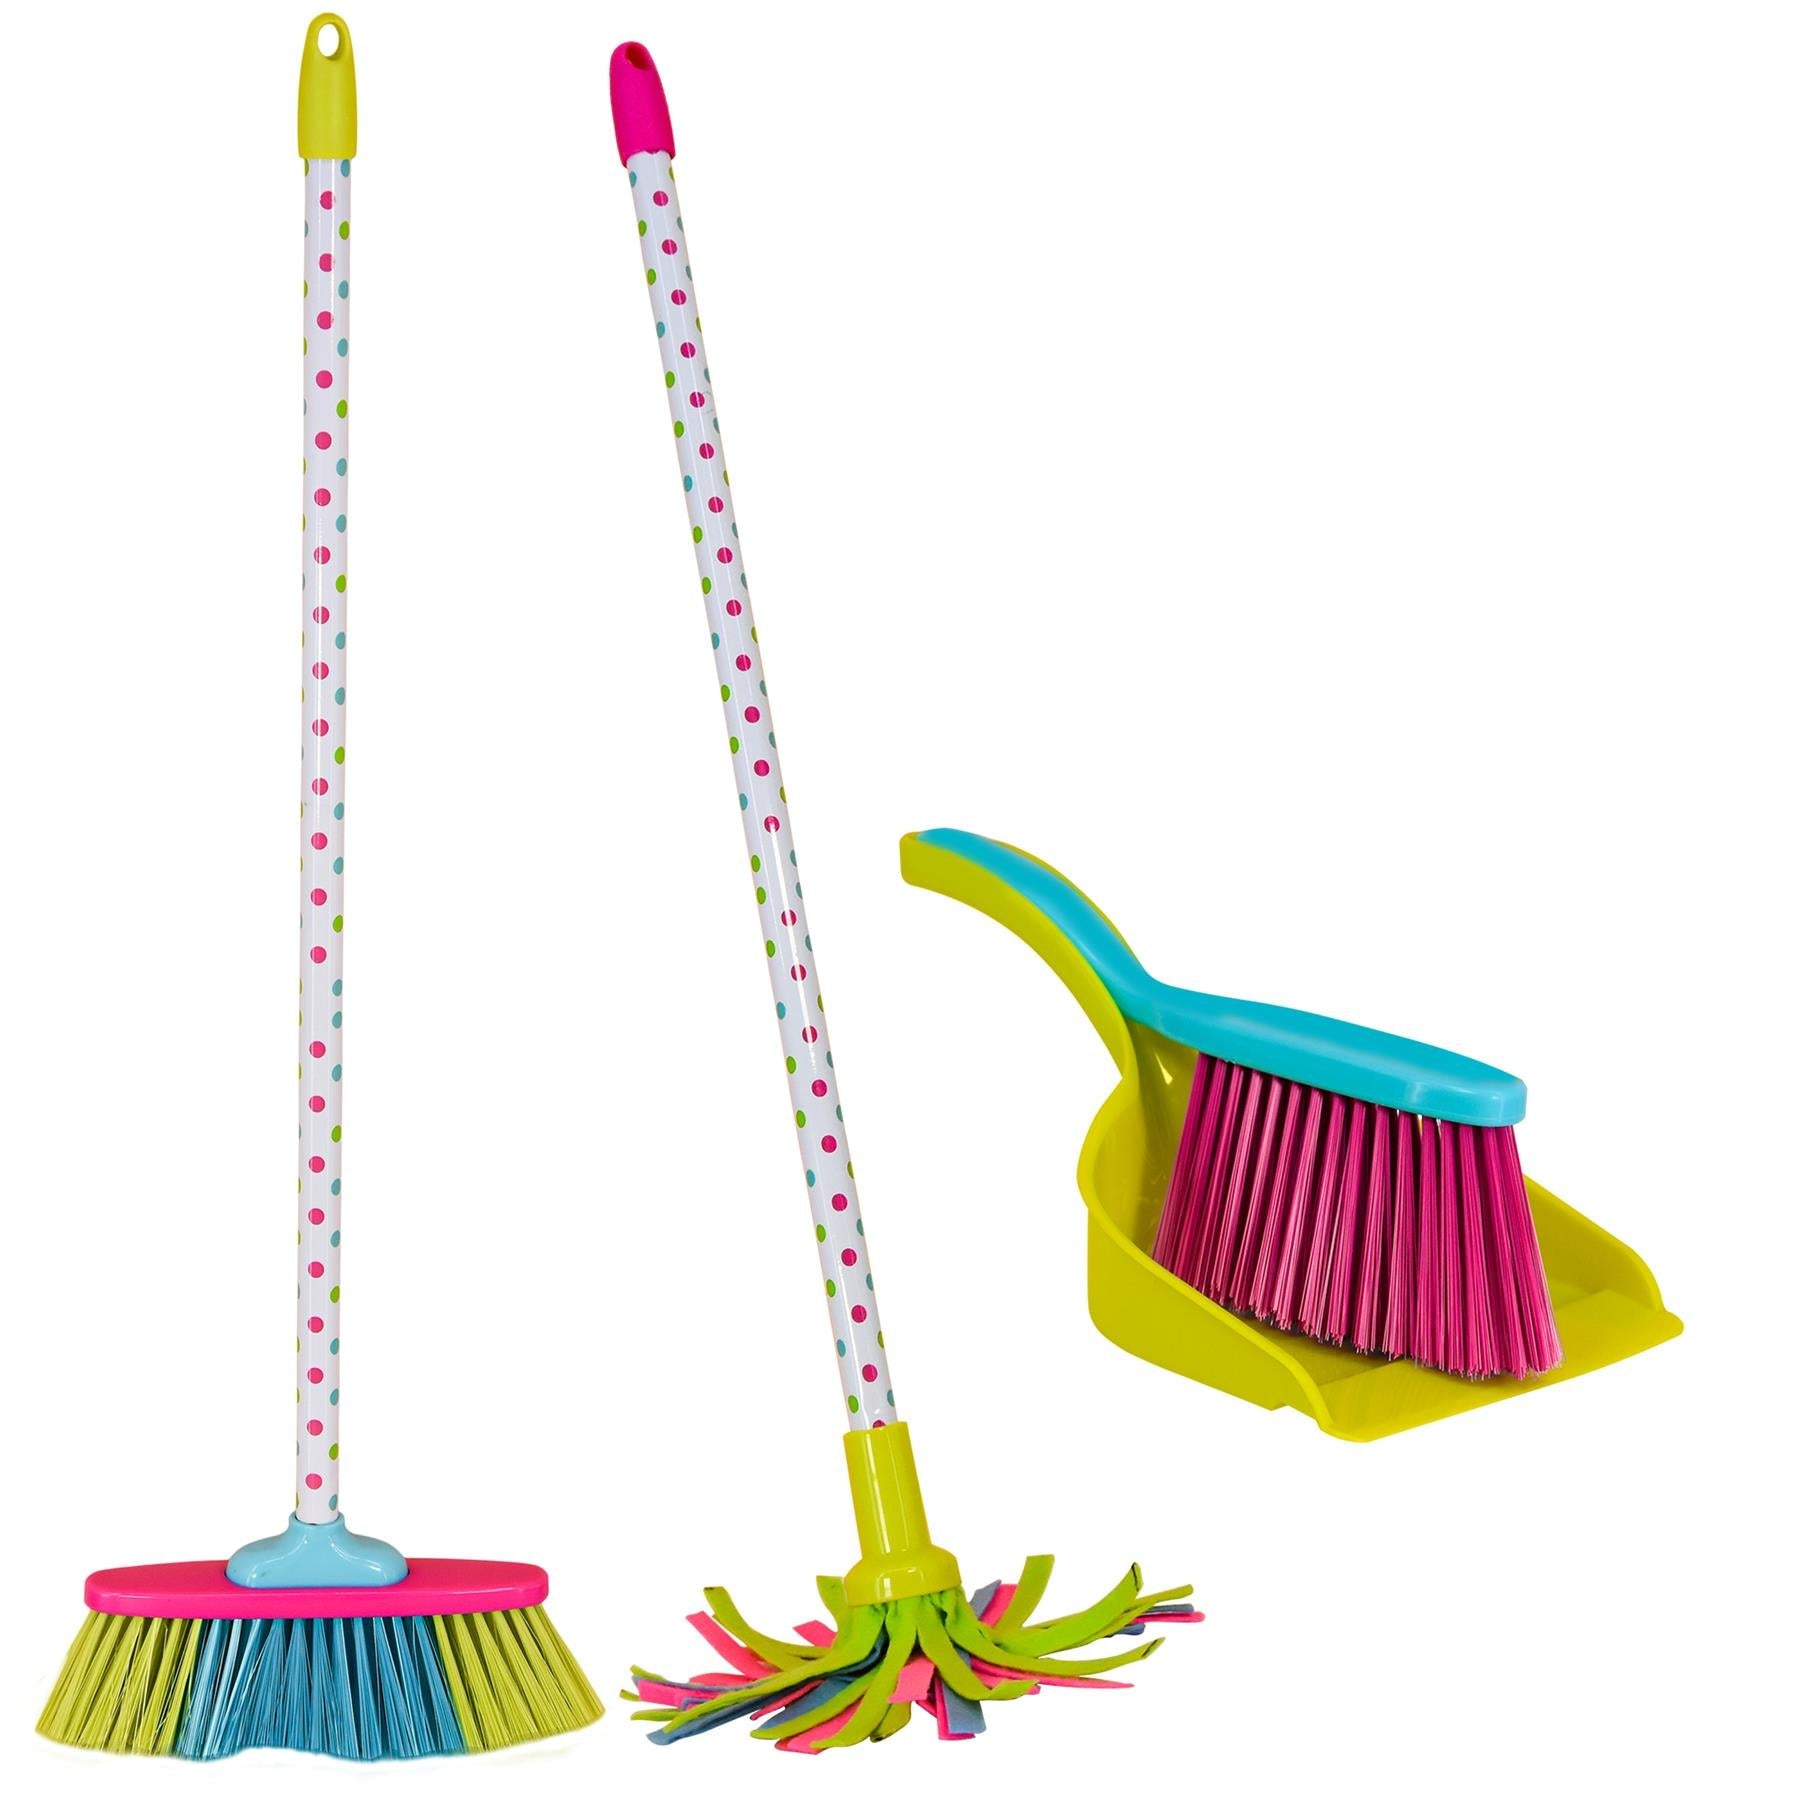 Kids Cleaning Play Set Toy The Magic Toy Shop - The Magic Toy Shop